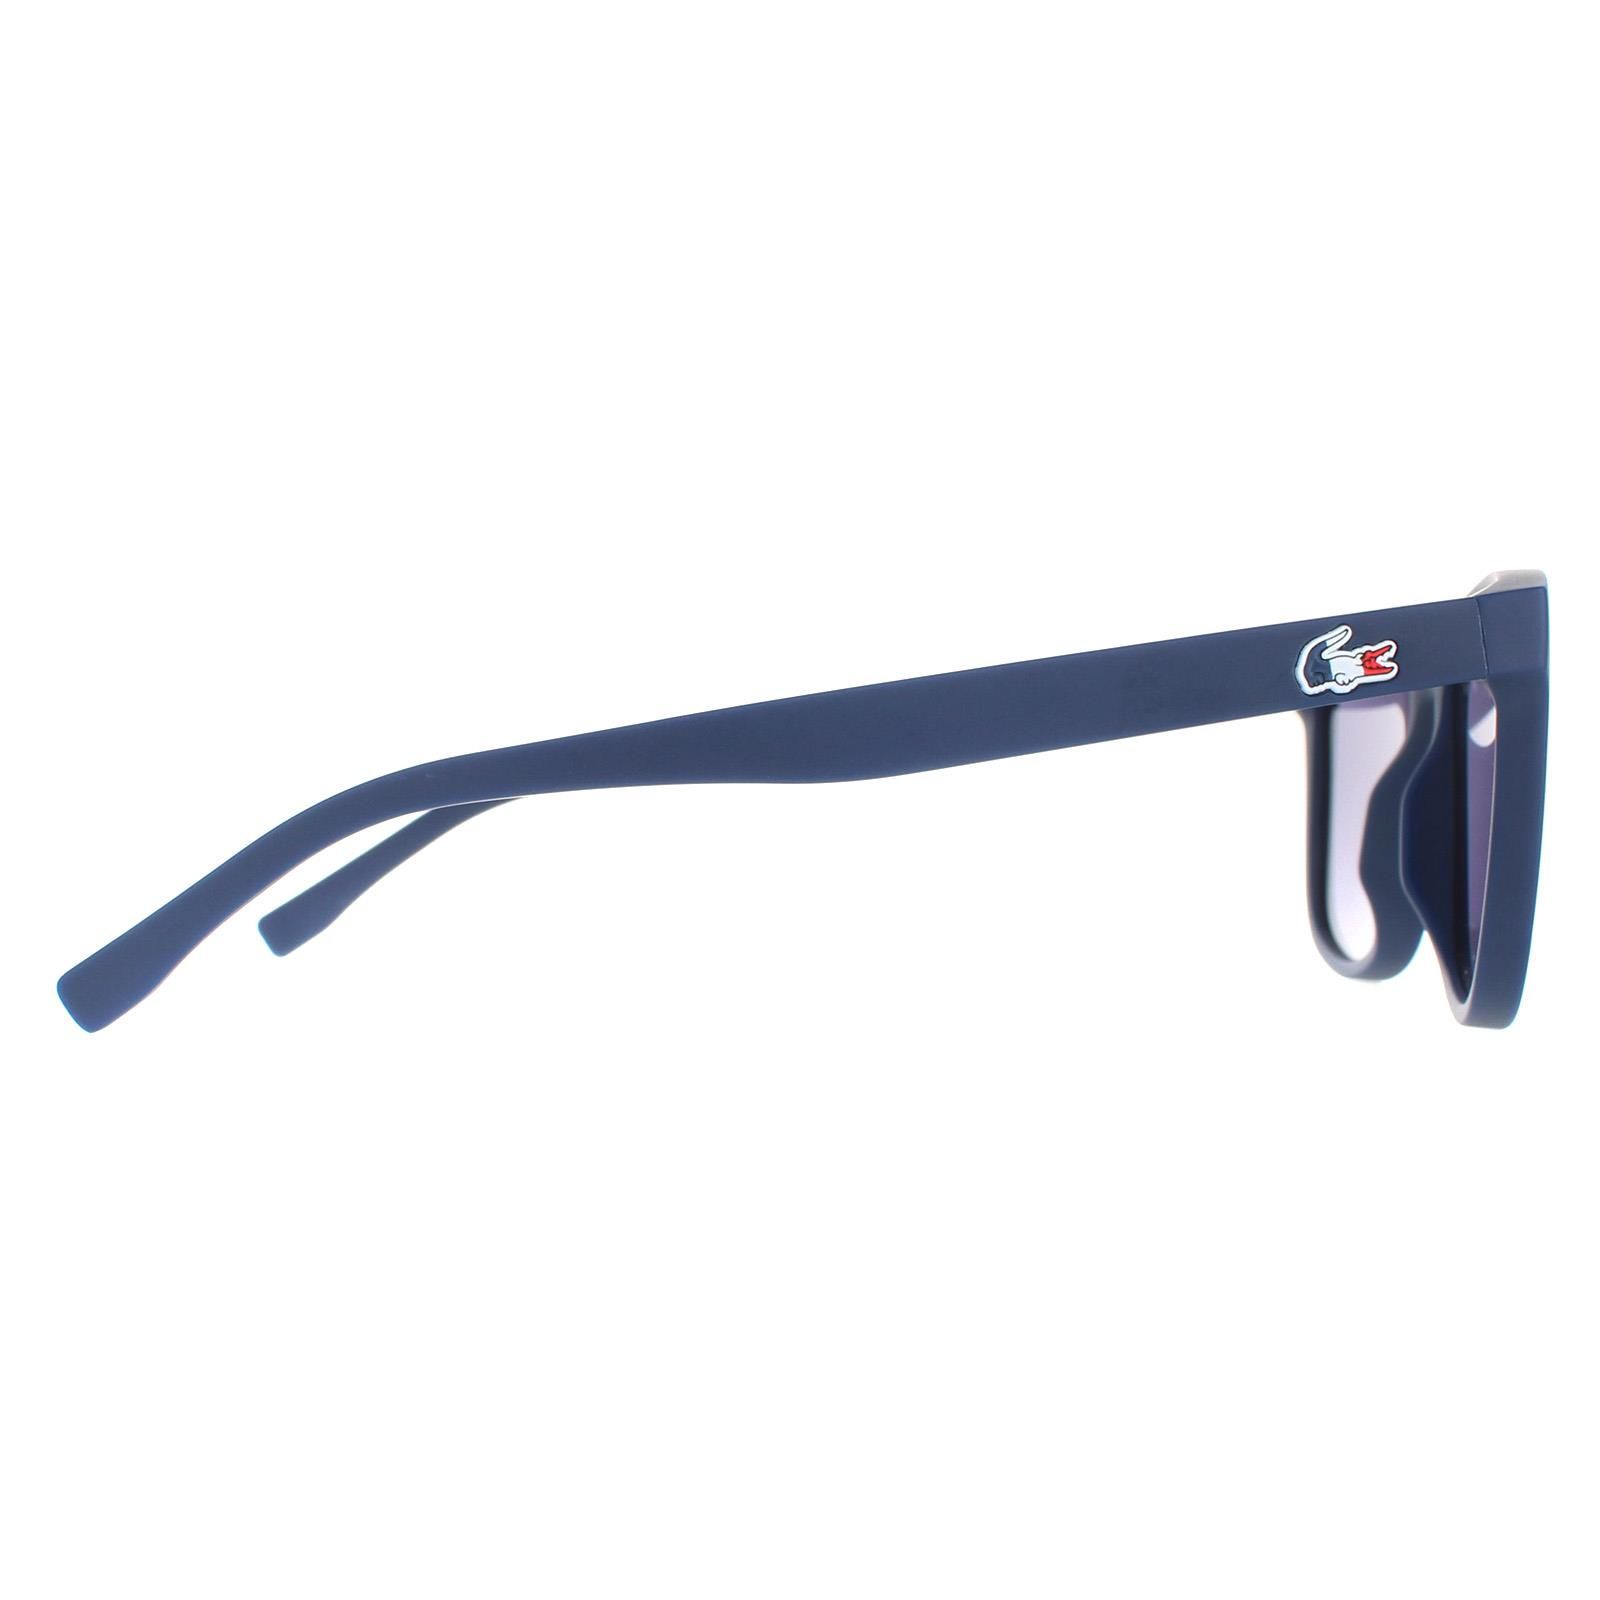 Lacoste Rectangle Unisex Blue France Blue L929SEOG Sunglasses are a classic rectangle style crafted from lightweight acetate. The iconic Lacoste logo features on the slender temples for brand authenticity.